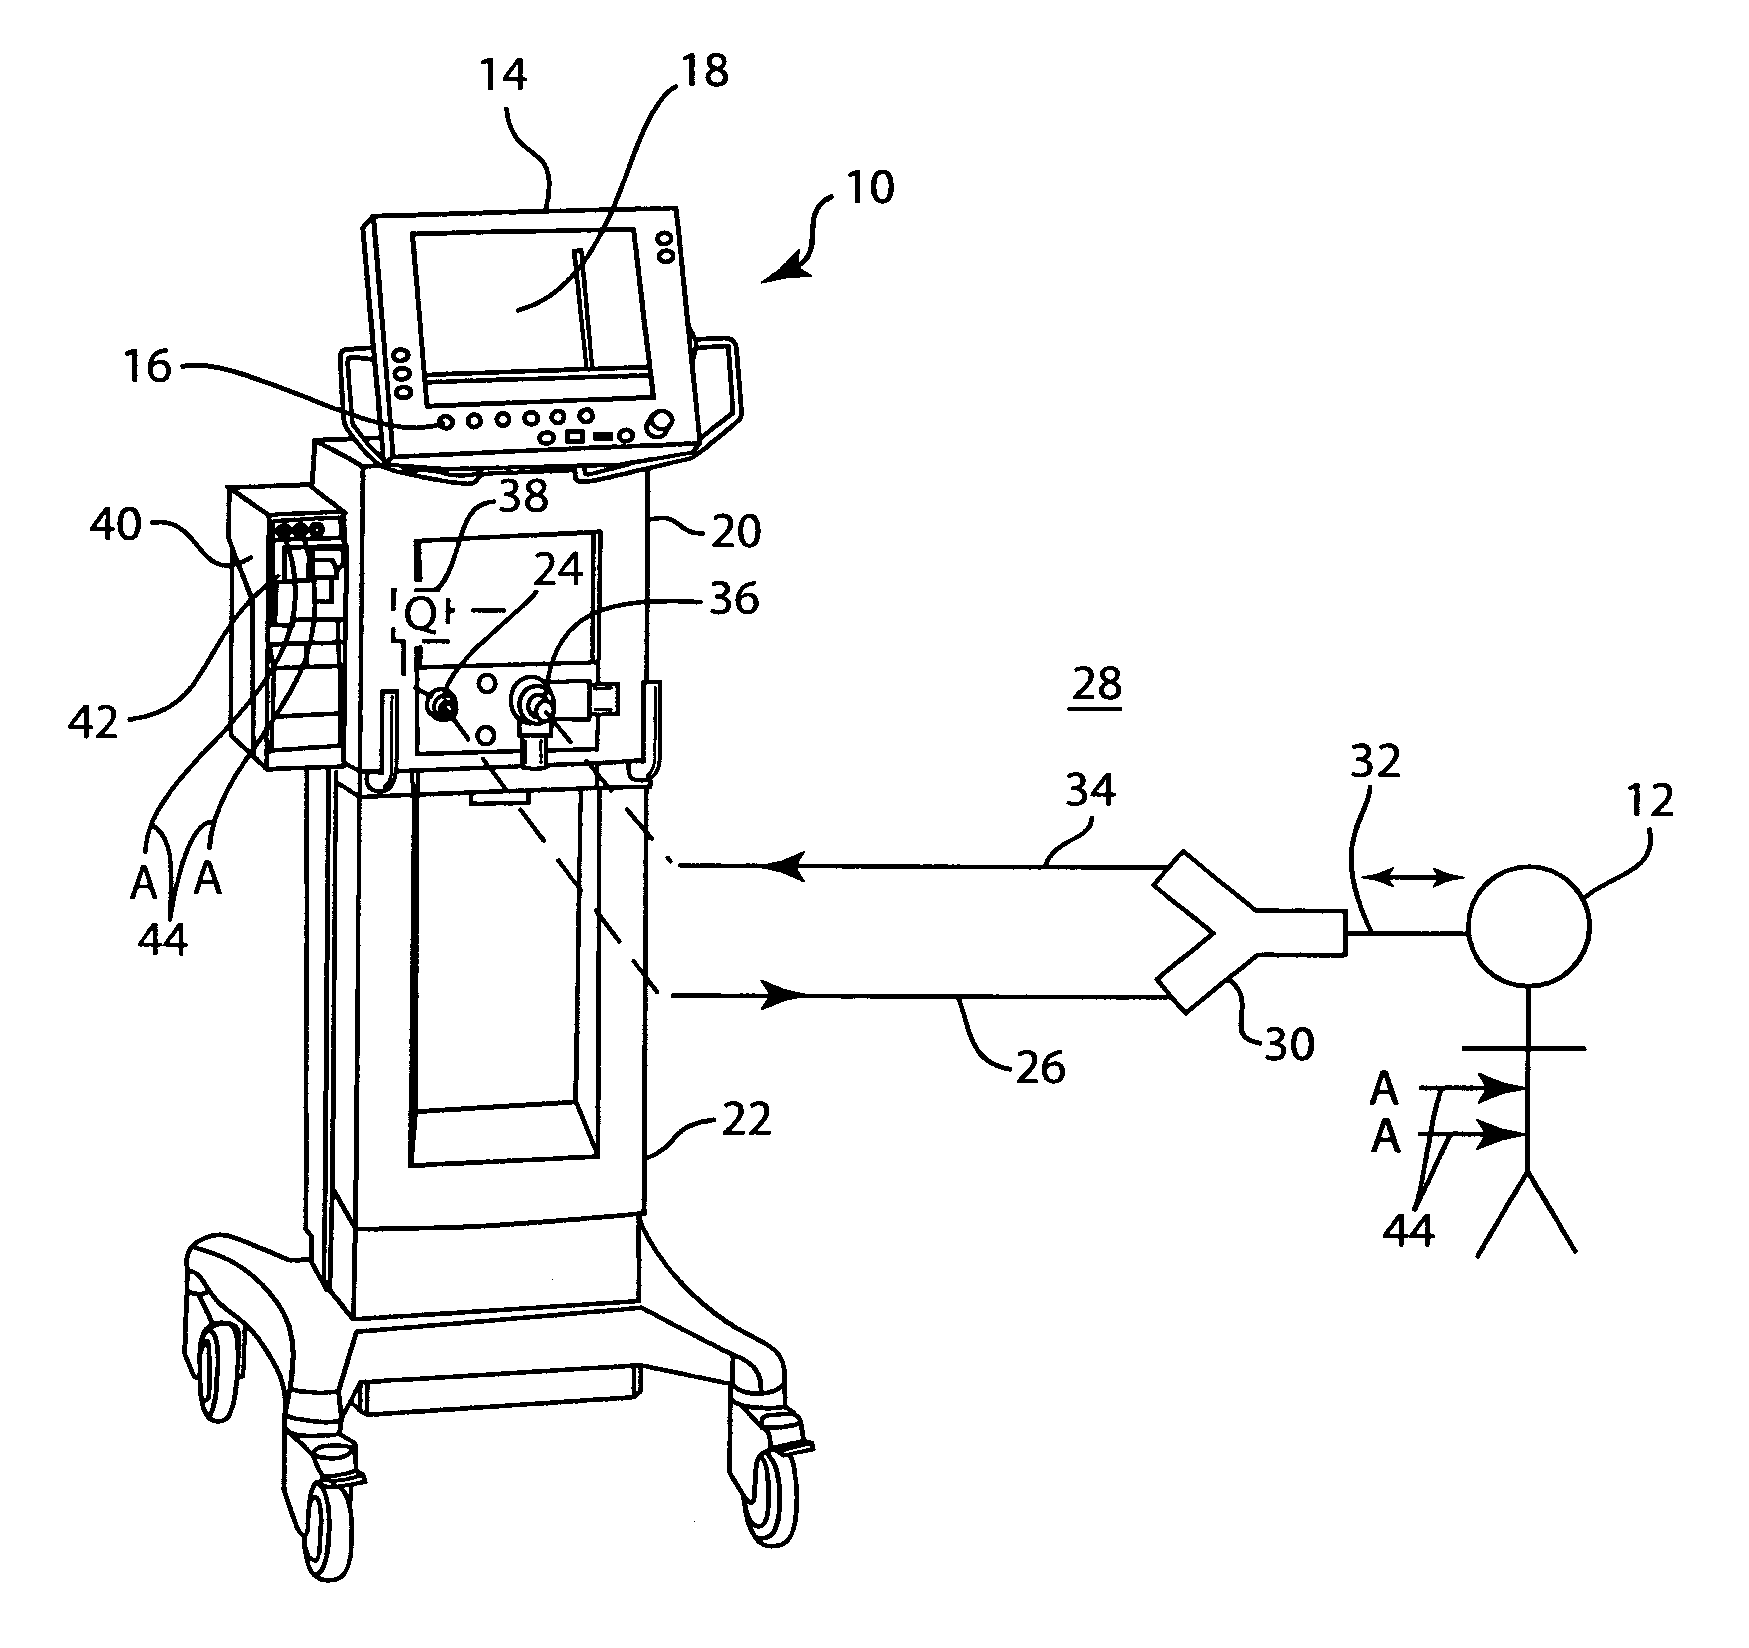 Modular nitric oxide delivery device